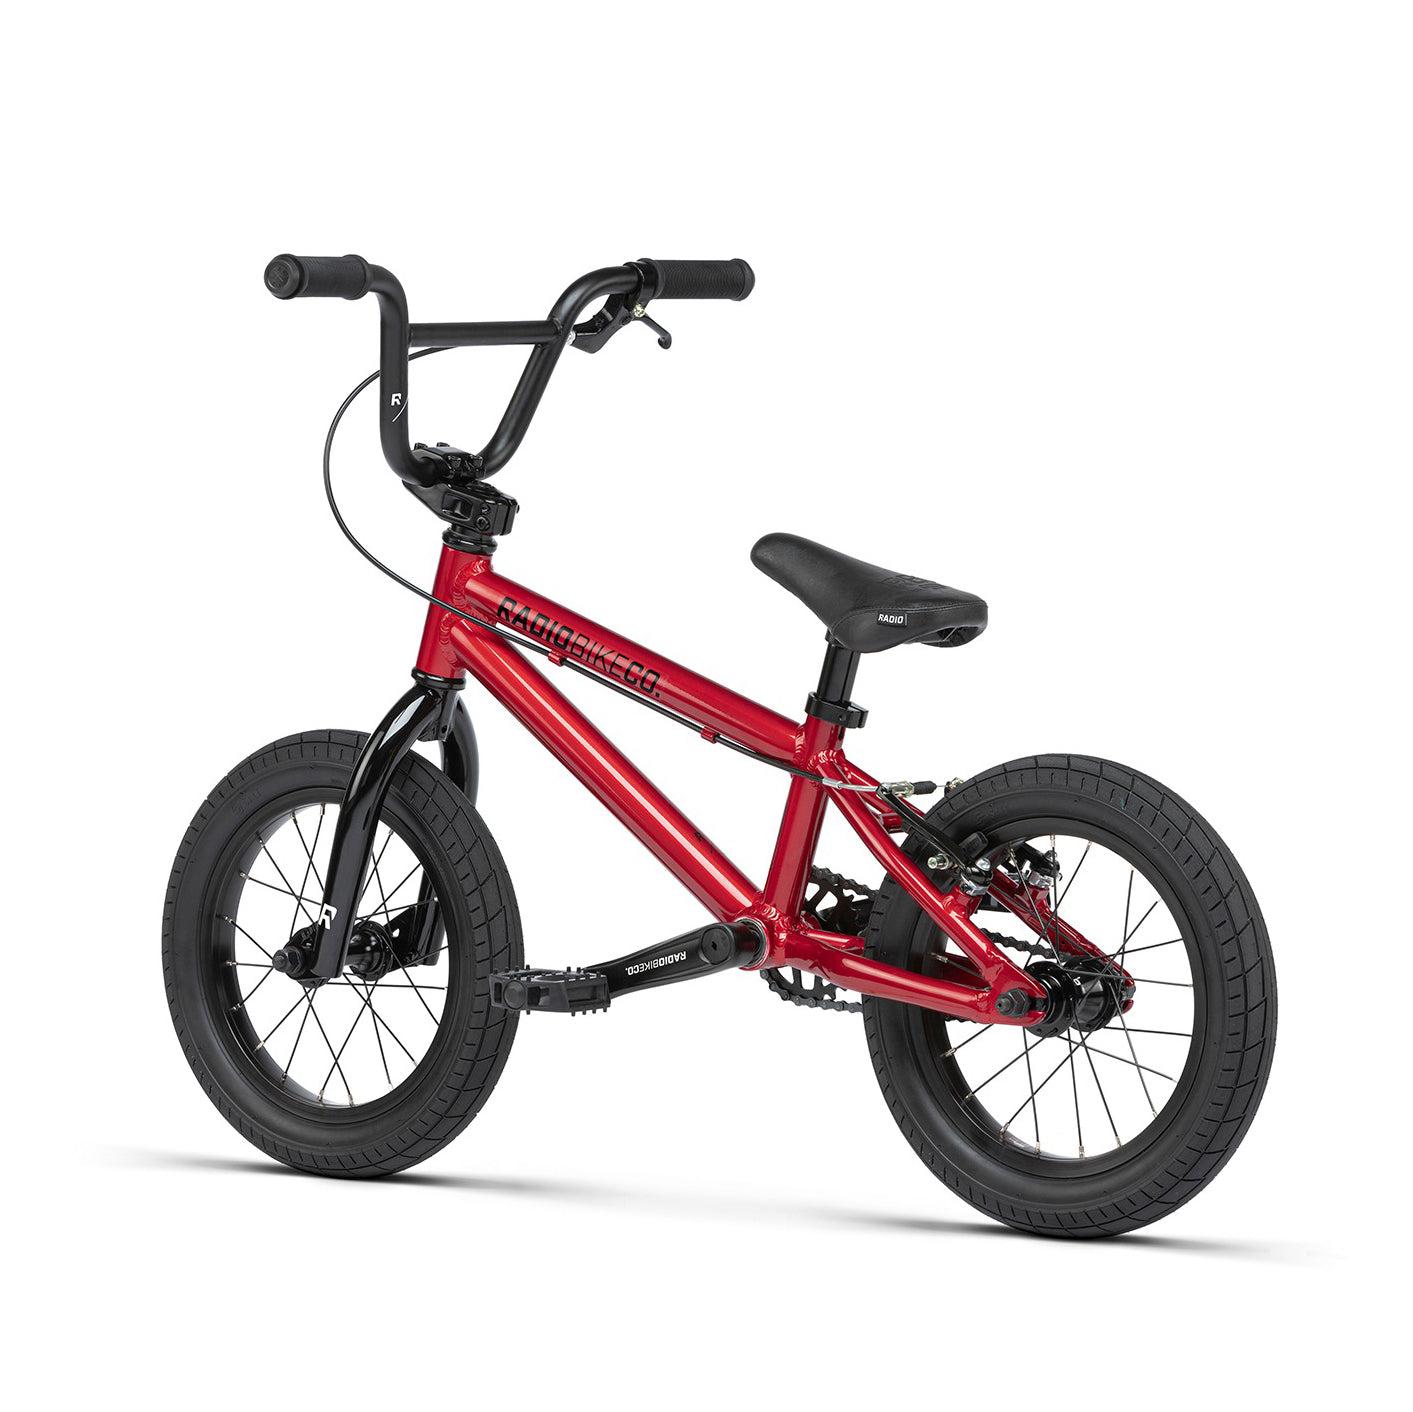 A small, lightweight kids bike with a Radio Dice 14 Inch Bike design, featuring thick black tires, black handlebars, and a black seat. The compact frame is made from 6061-T6 alloy and proudly displays the brand name "Raleigh" on the side.